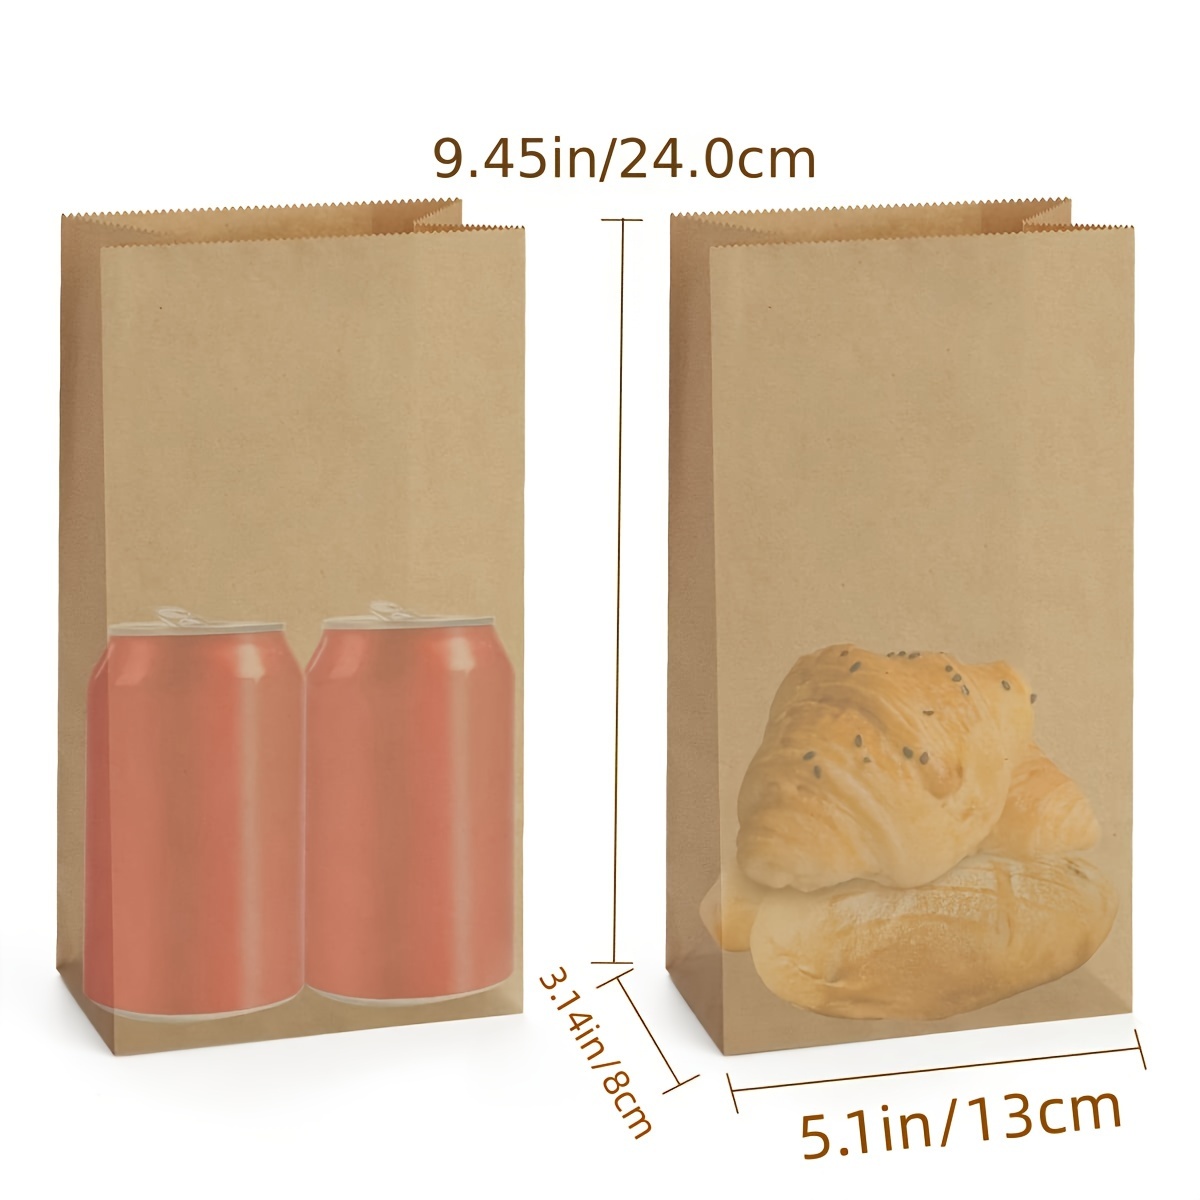 Paper Lunch Bags 50 Count Large White Lunch Bags Kraft White Paper Bag